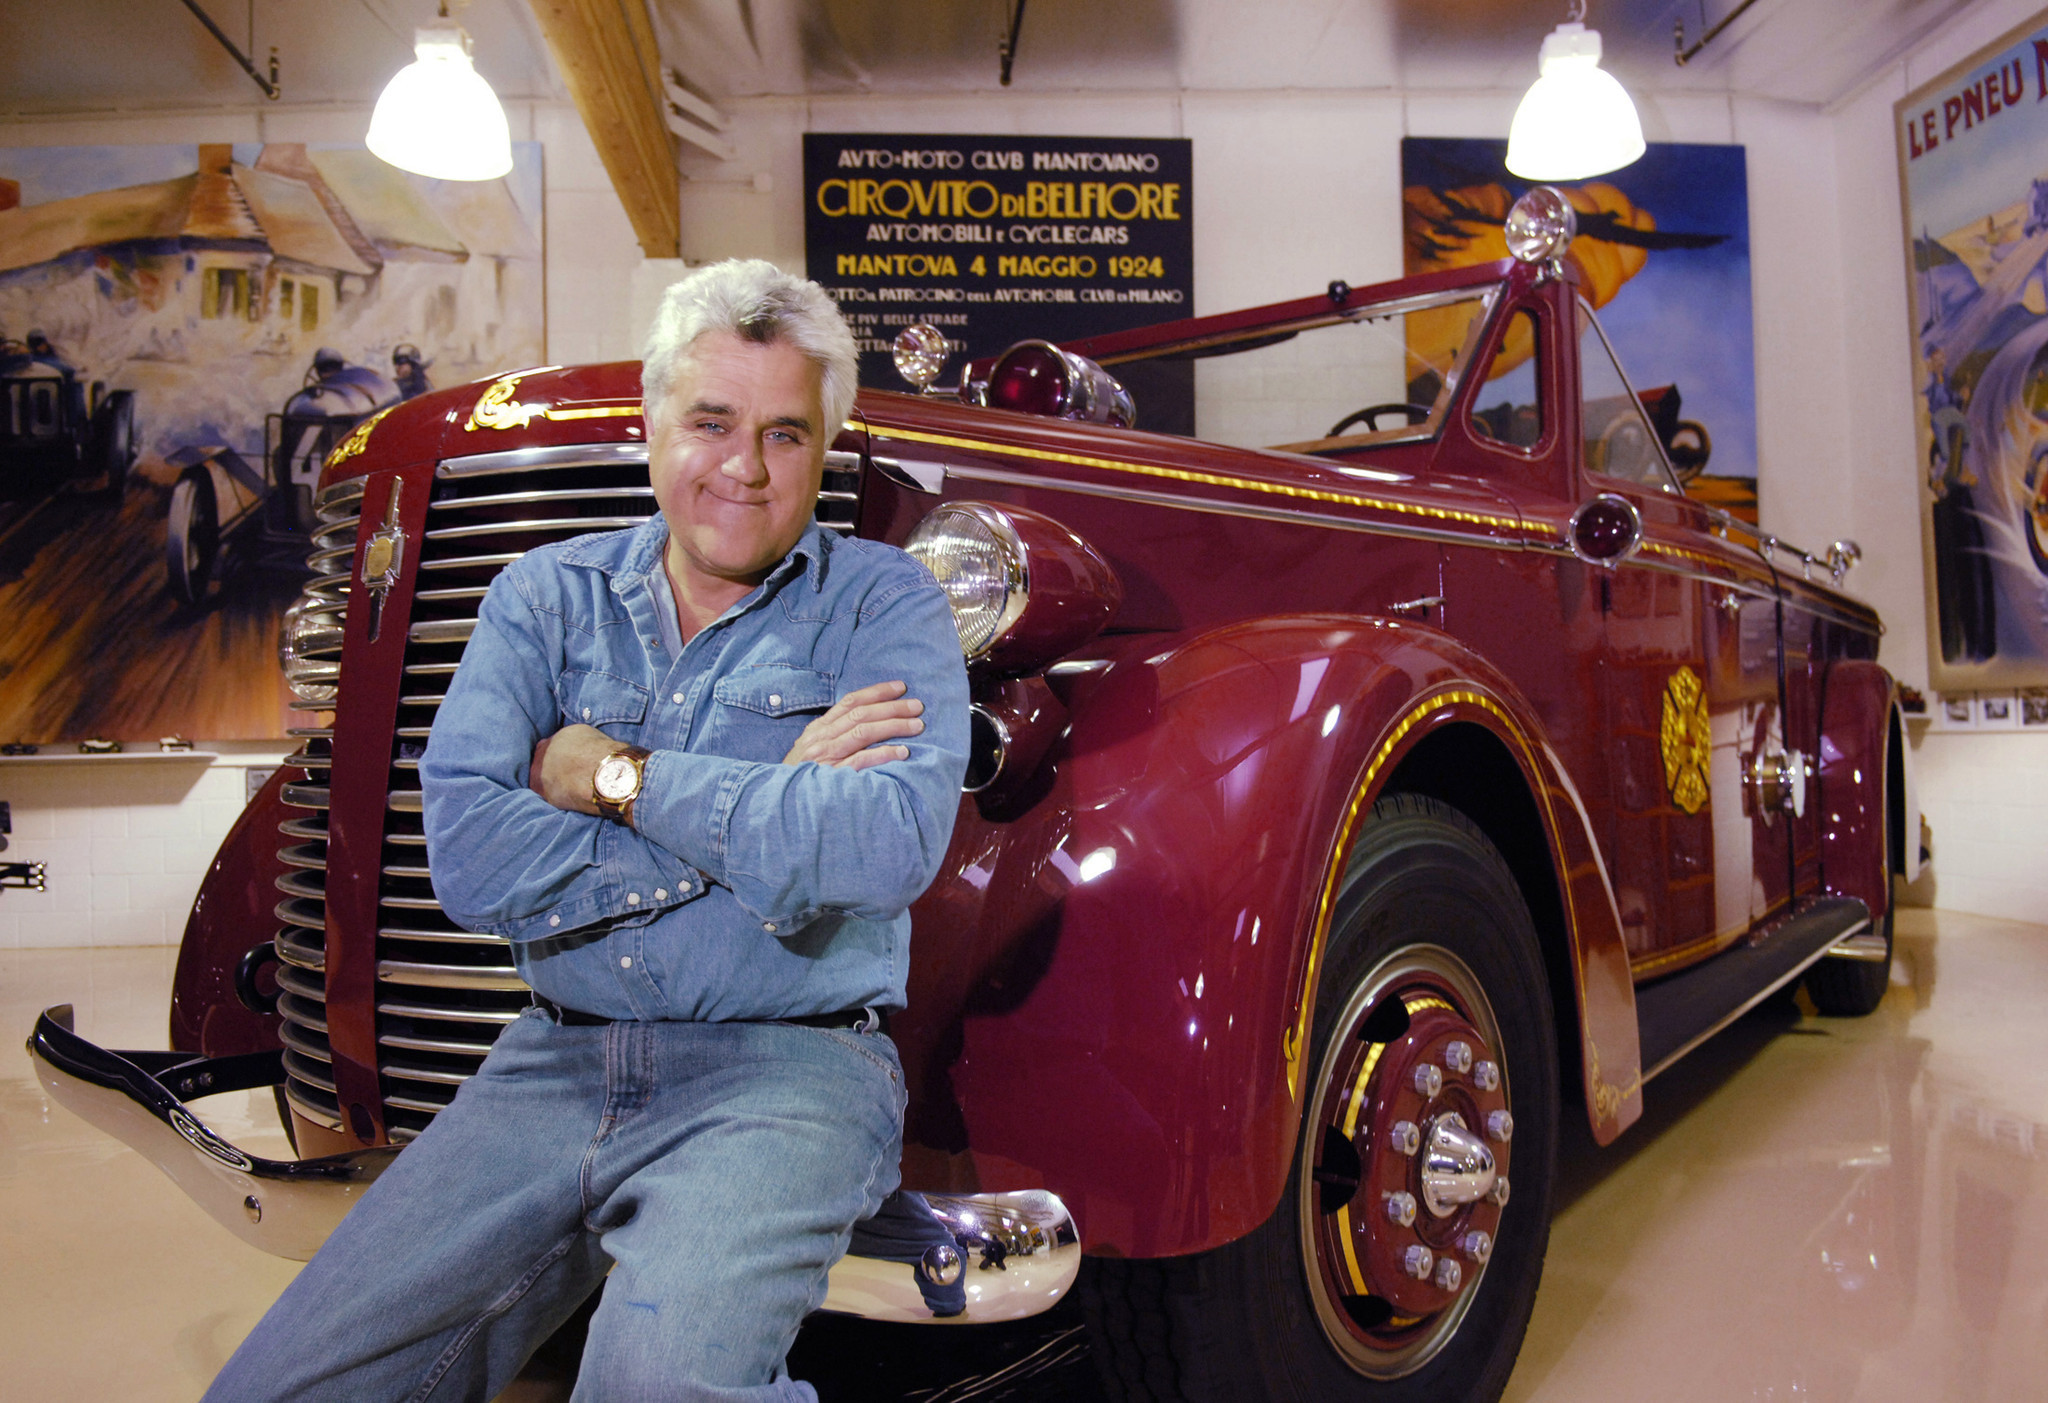 Can you schedule a personal tour of Jay Leno's garage?